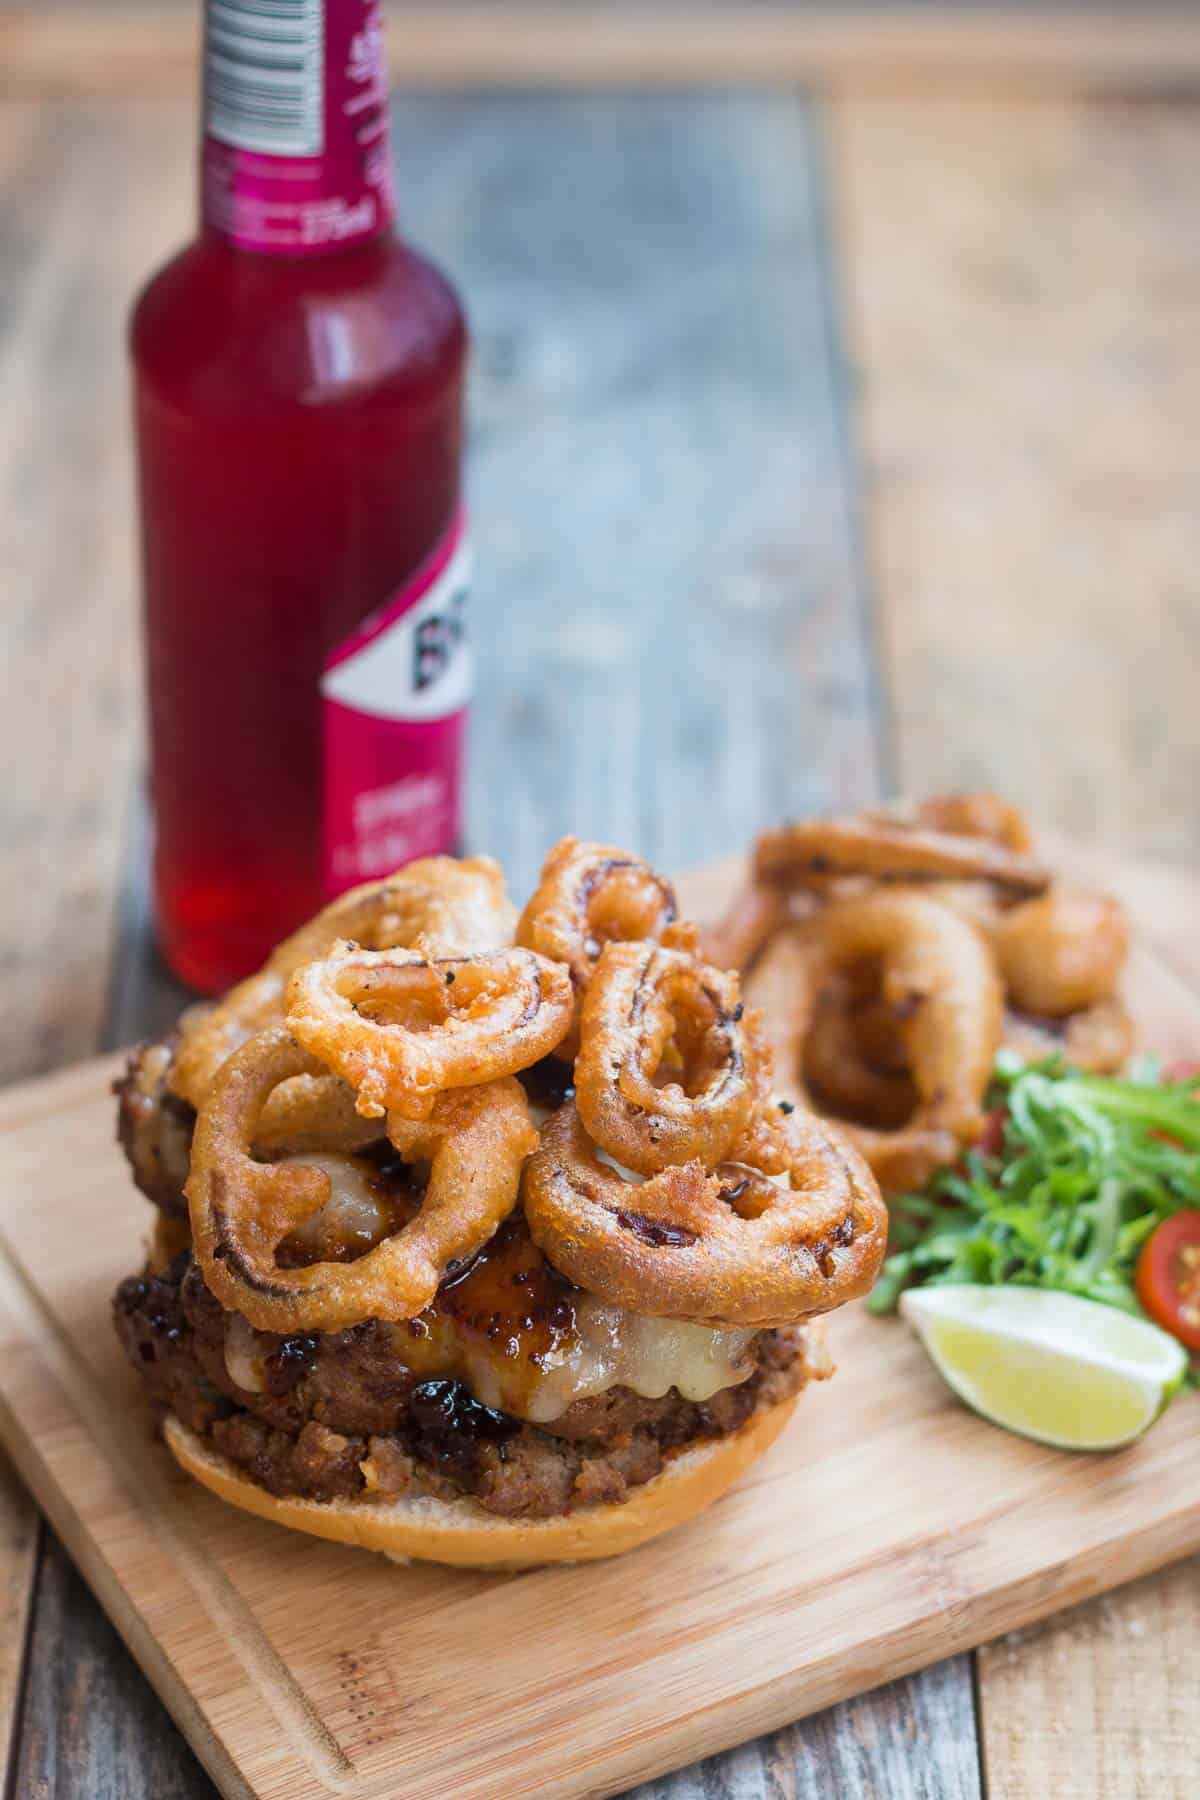 Crispy onion rings added to the burger to give it some crunch.